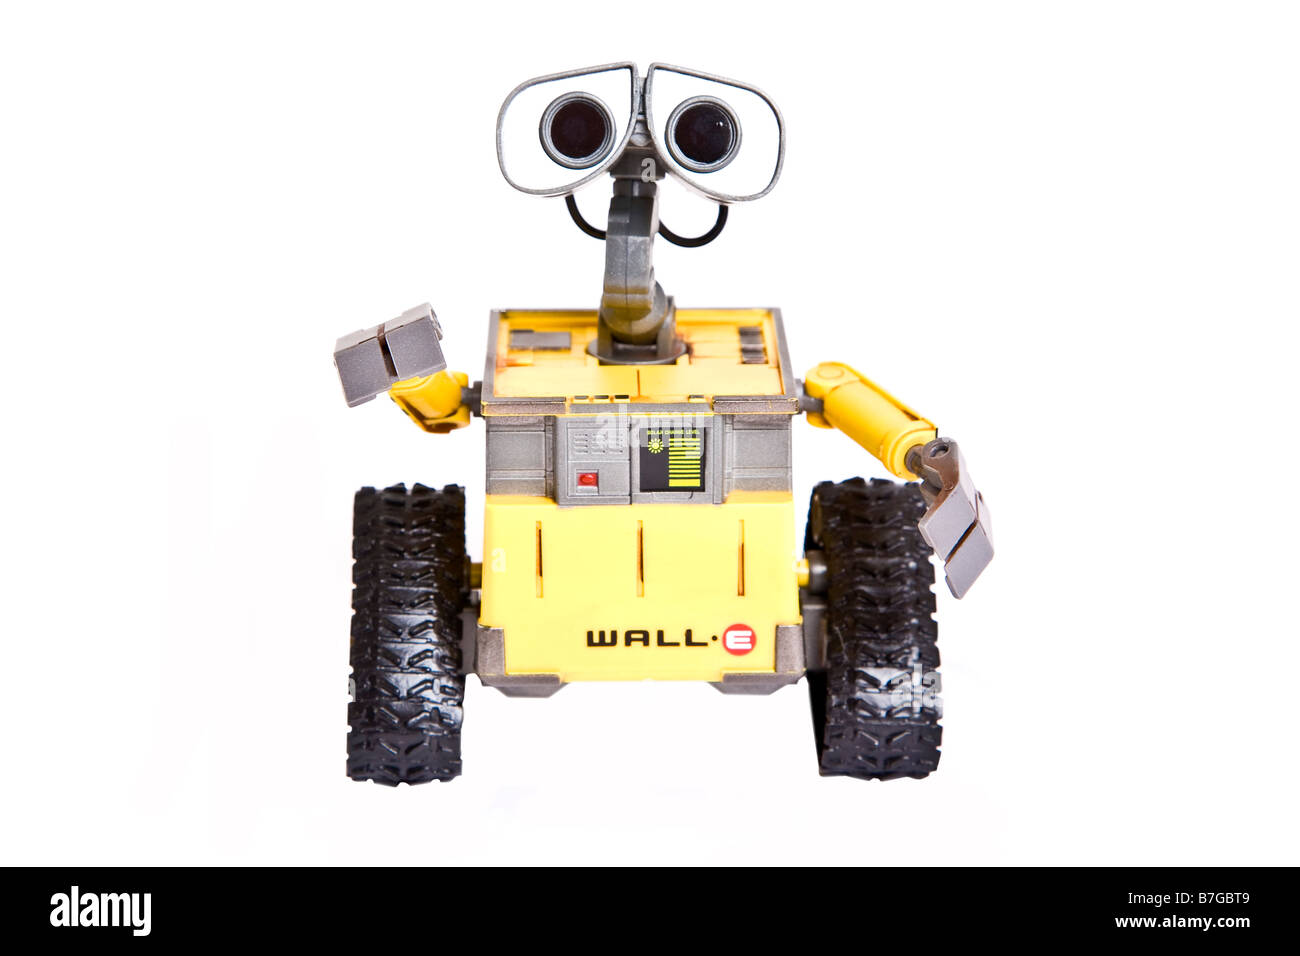 Wall e the robot hi-res stock photography and images - Alamy